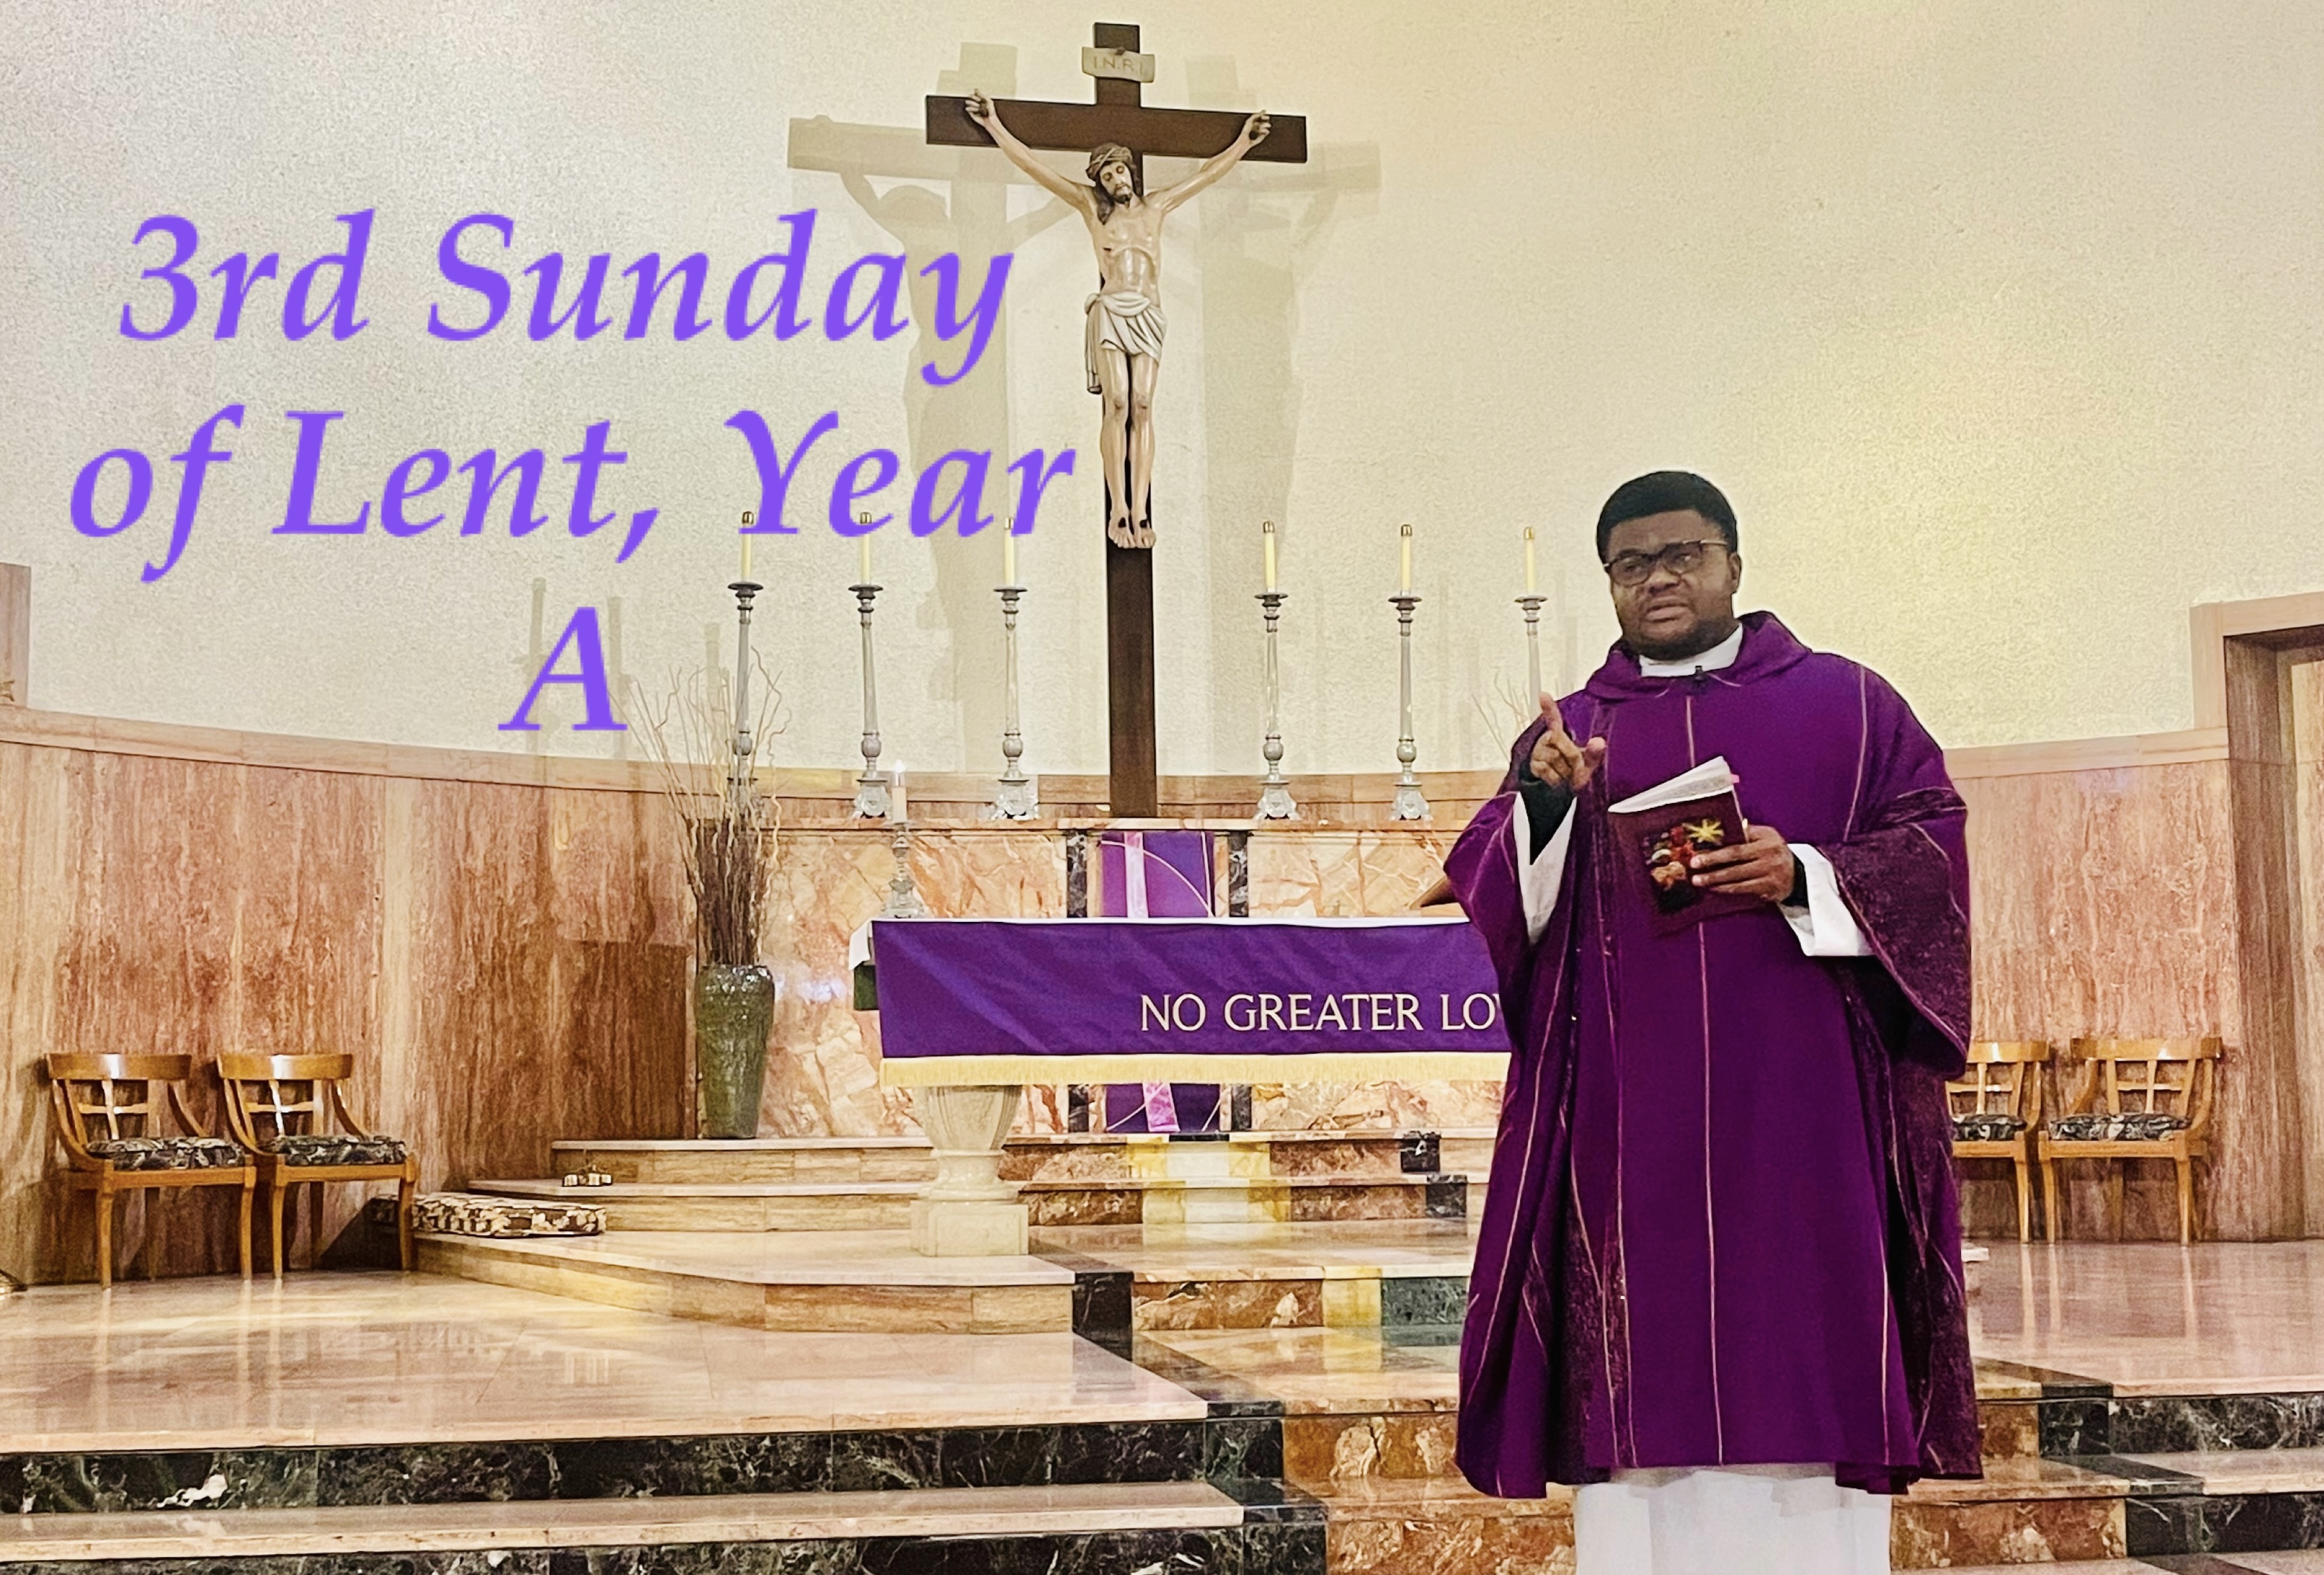 3rd Sunday of Lent, Year A